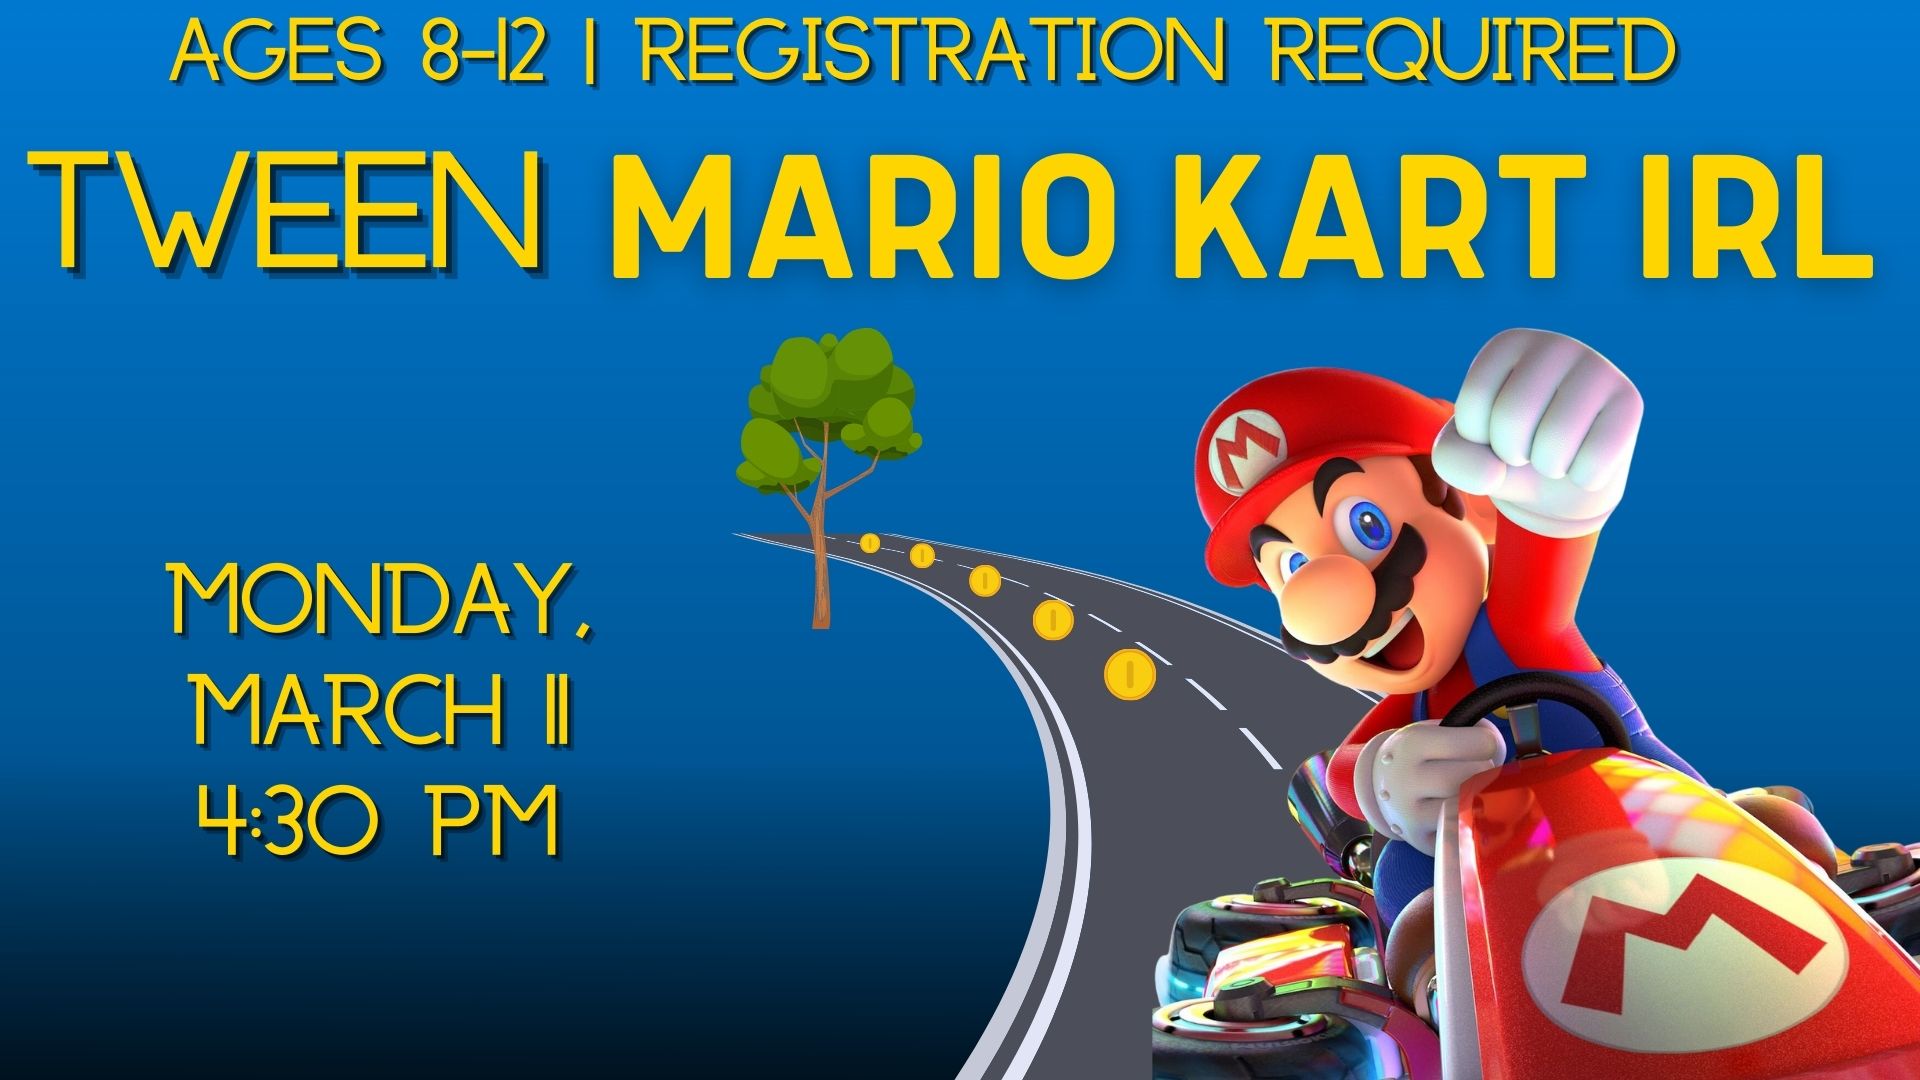 Blue background with Mario racing his cart towards viewer down a paved road with his fist in the air and a smile on his face.   Text reads Ages 8-12. Registration required.  Tween Mario Kart IRL.  Monday, March 11 @ 4:30